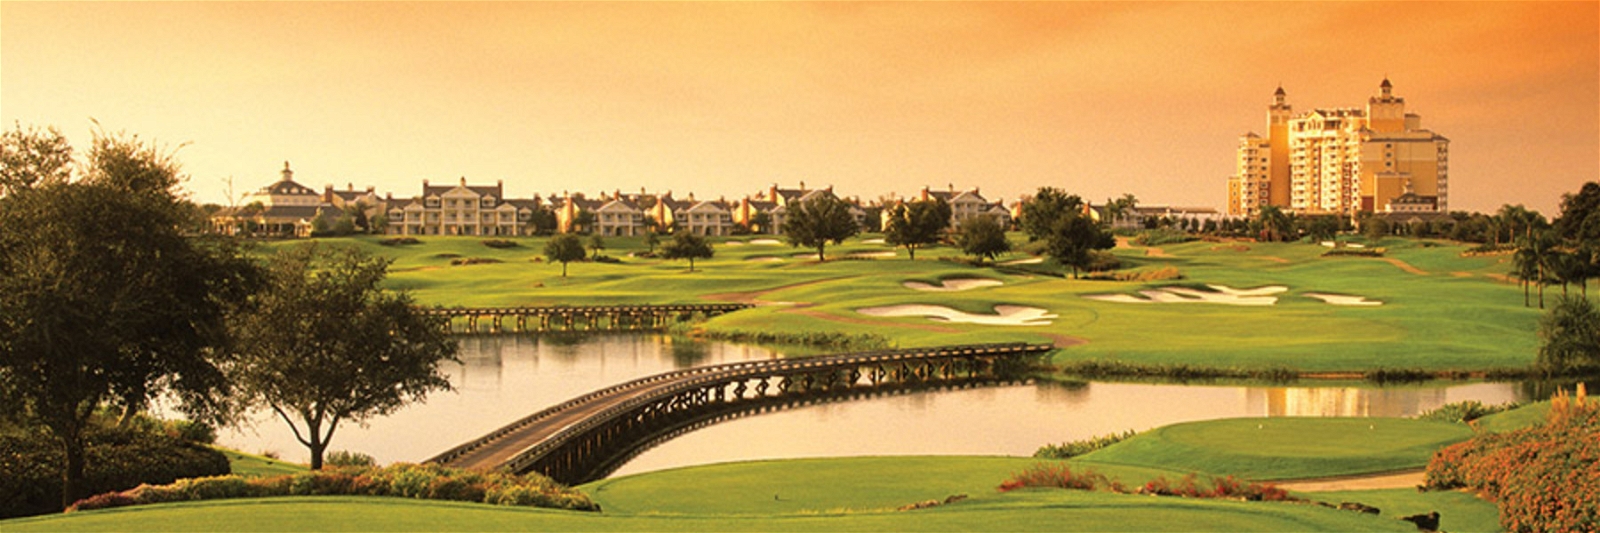 Golf Vacation Package - Reunion Resort Orlando Stay & Play Special from $259 per day!